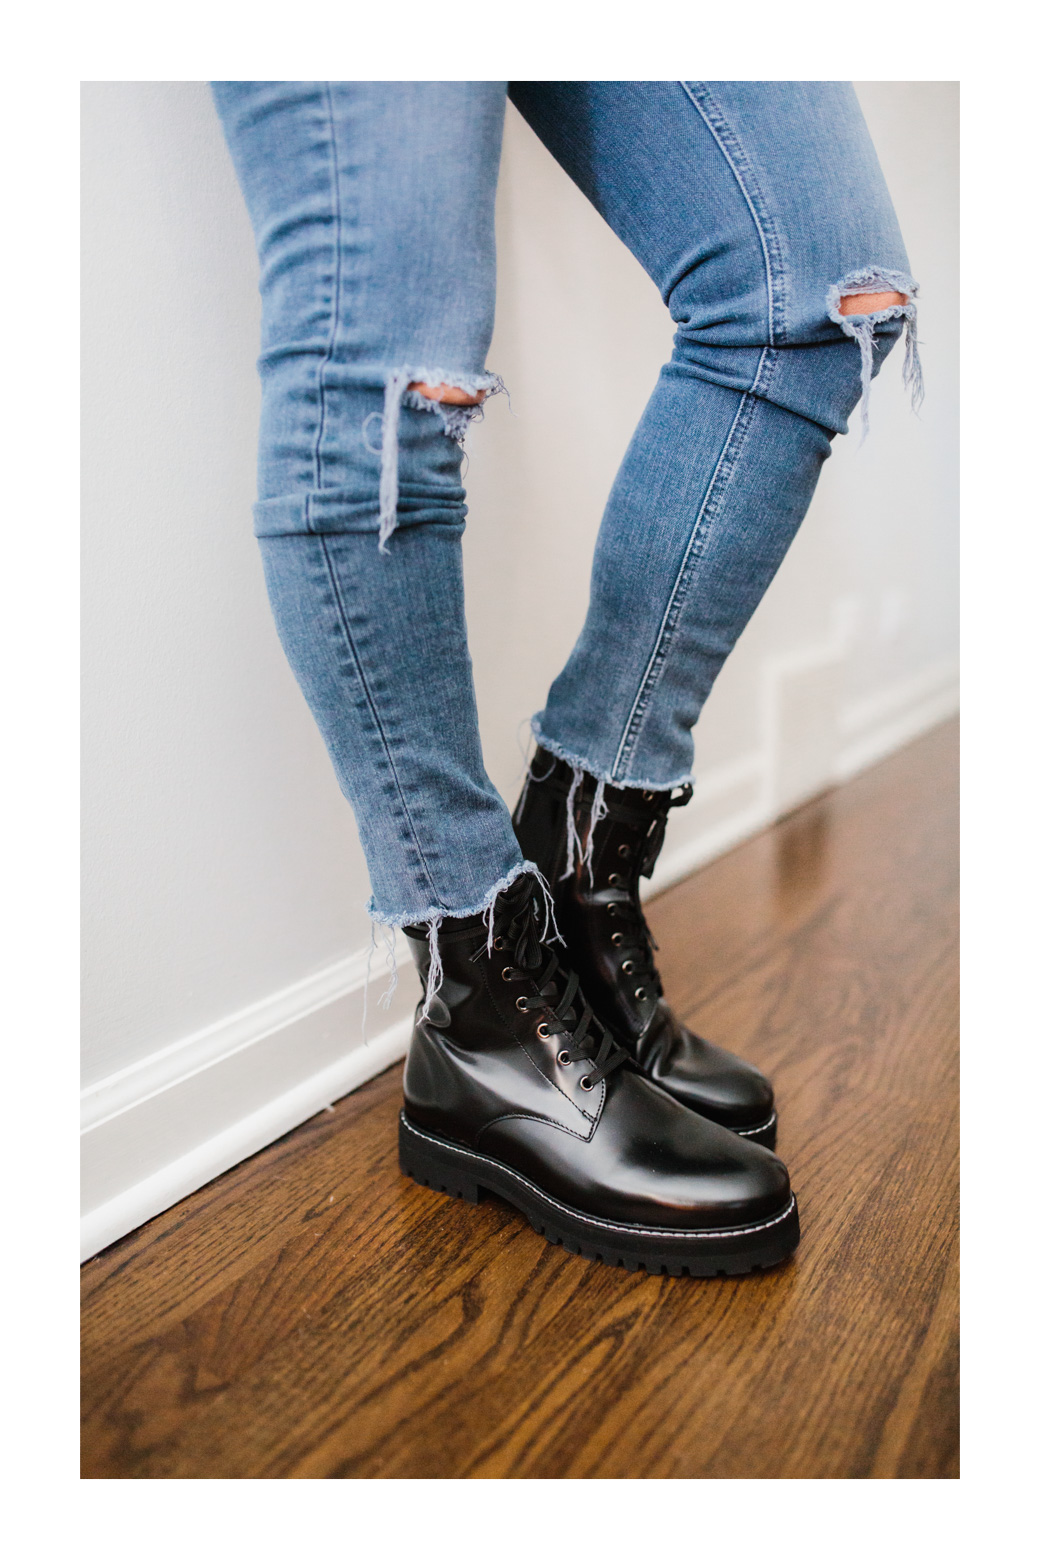 ways to wear combat boots